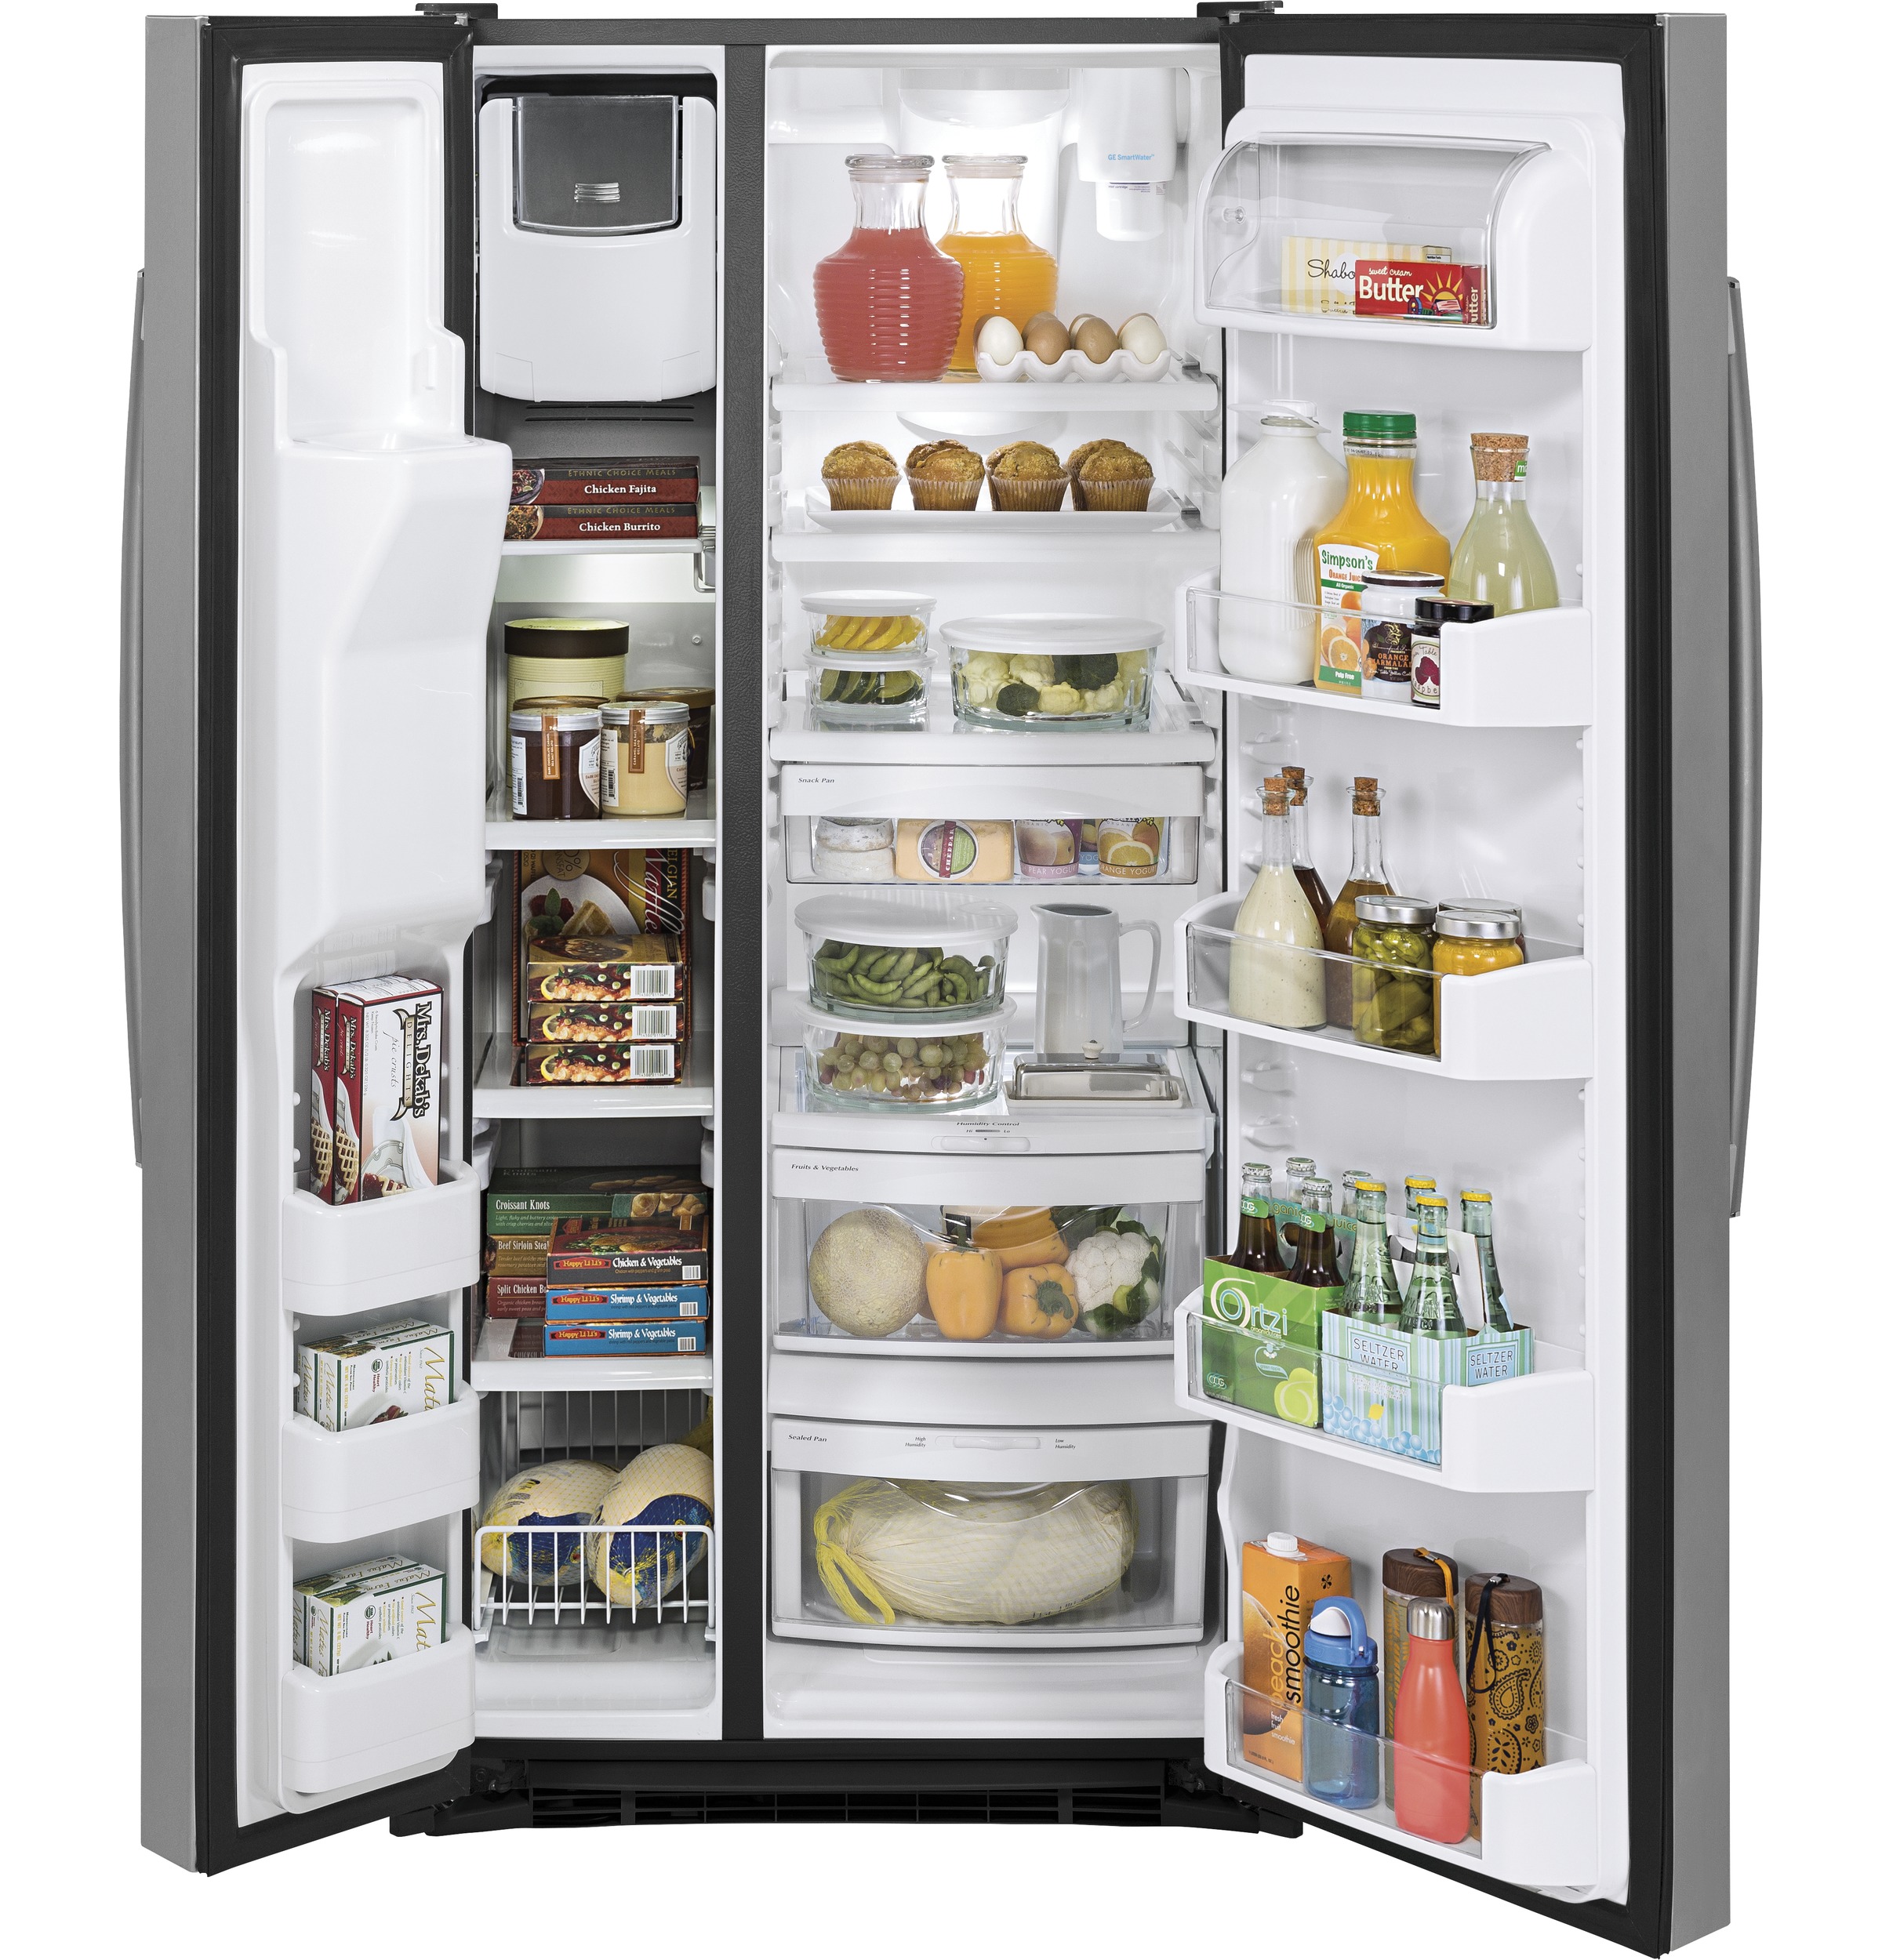 GE - 23.2 Cu. Ft. Side-by-Side Refrigerator with Thru-the-Door Ice and Water - Stainless steel